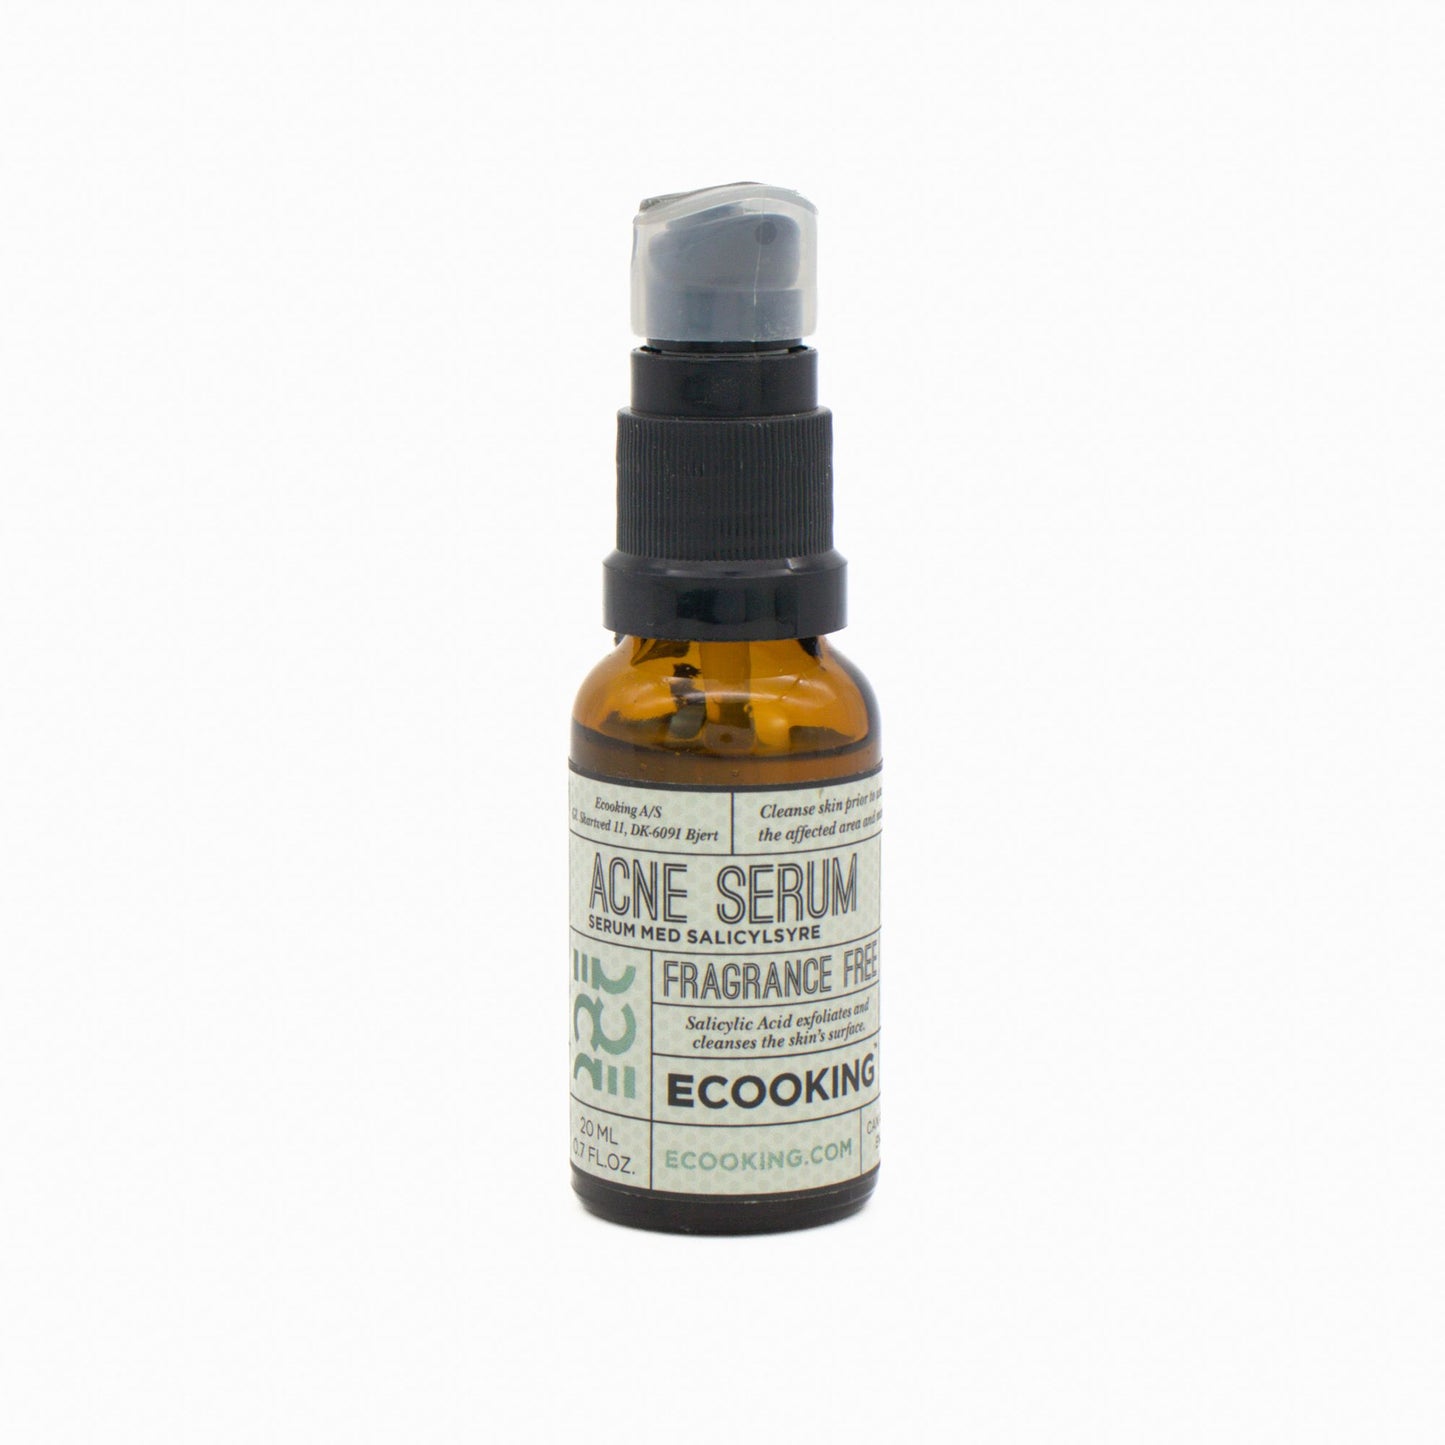 Ecooking Acne Serum 20ml with Salicylic Acid Paraben Free - Imperfect Container